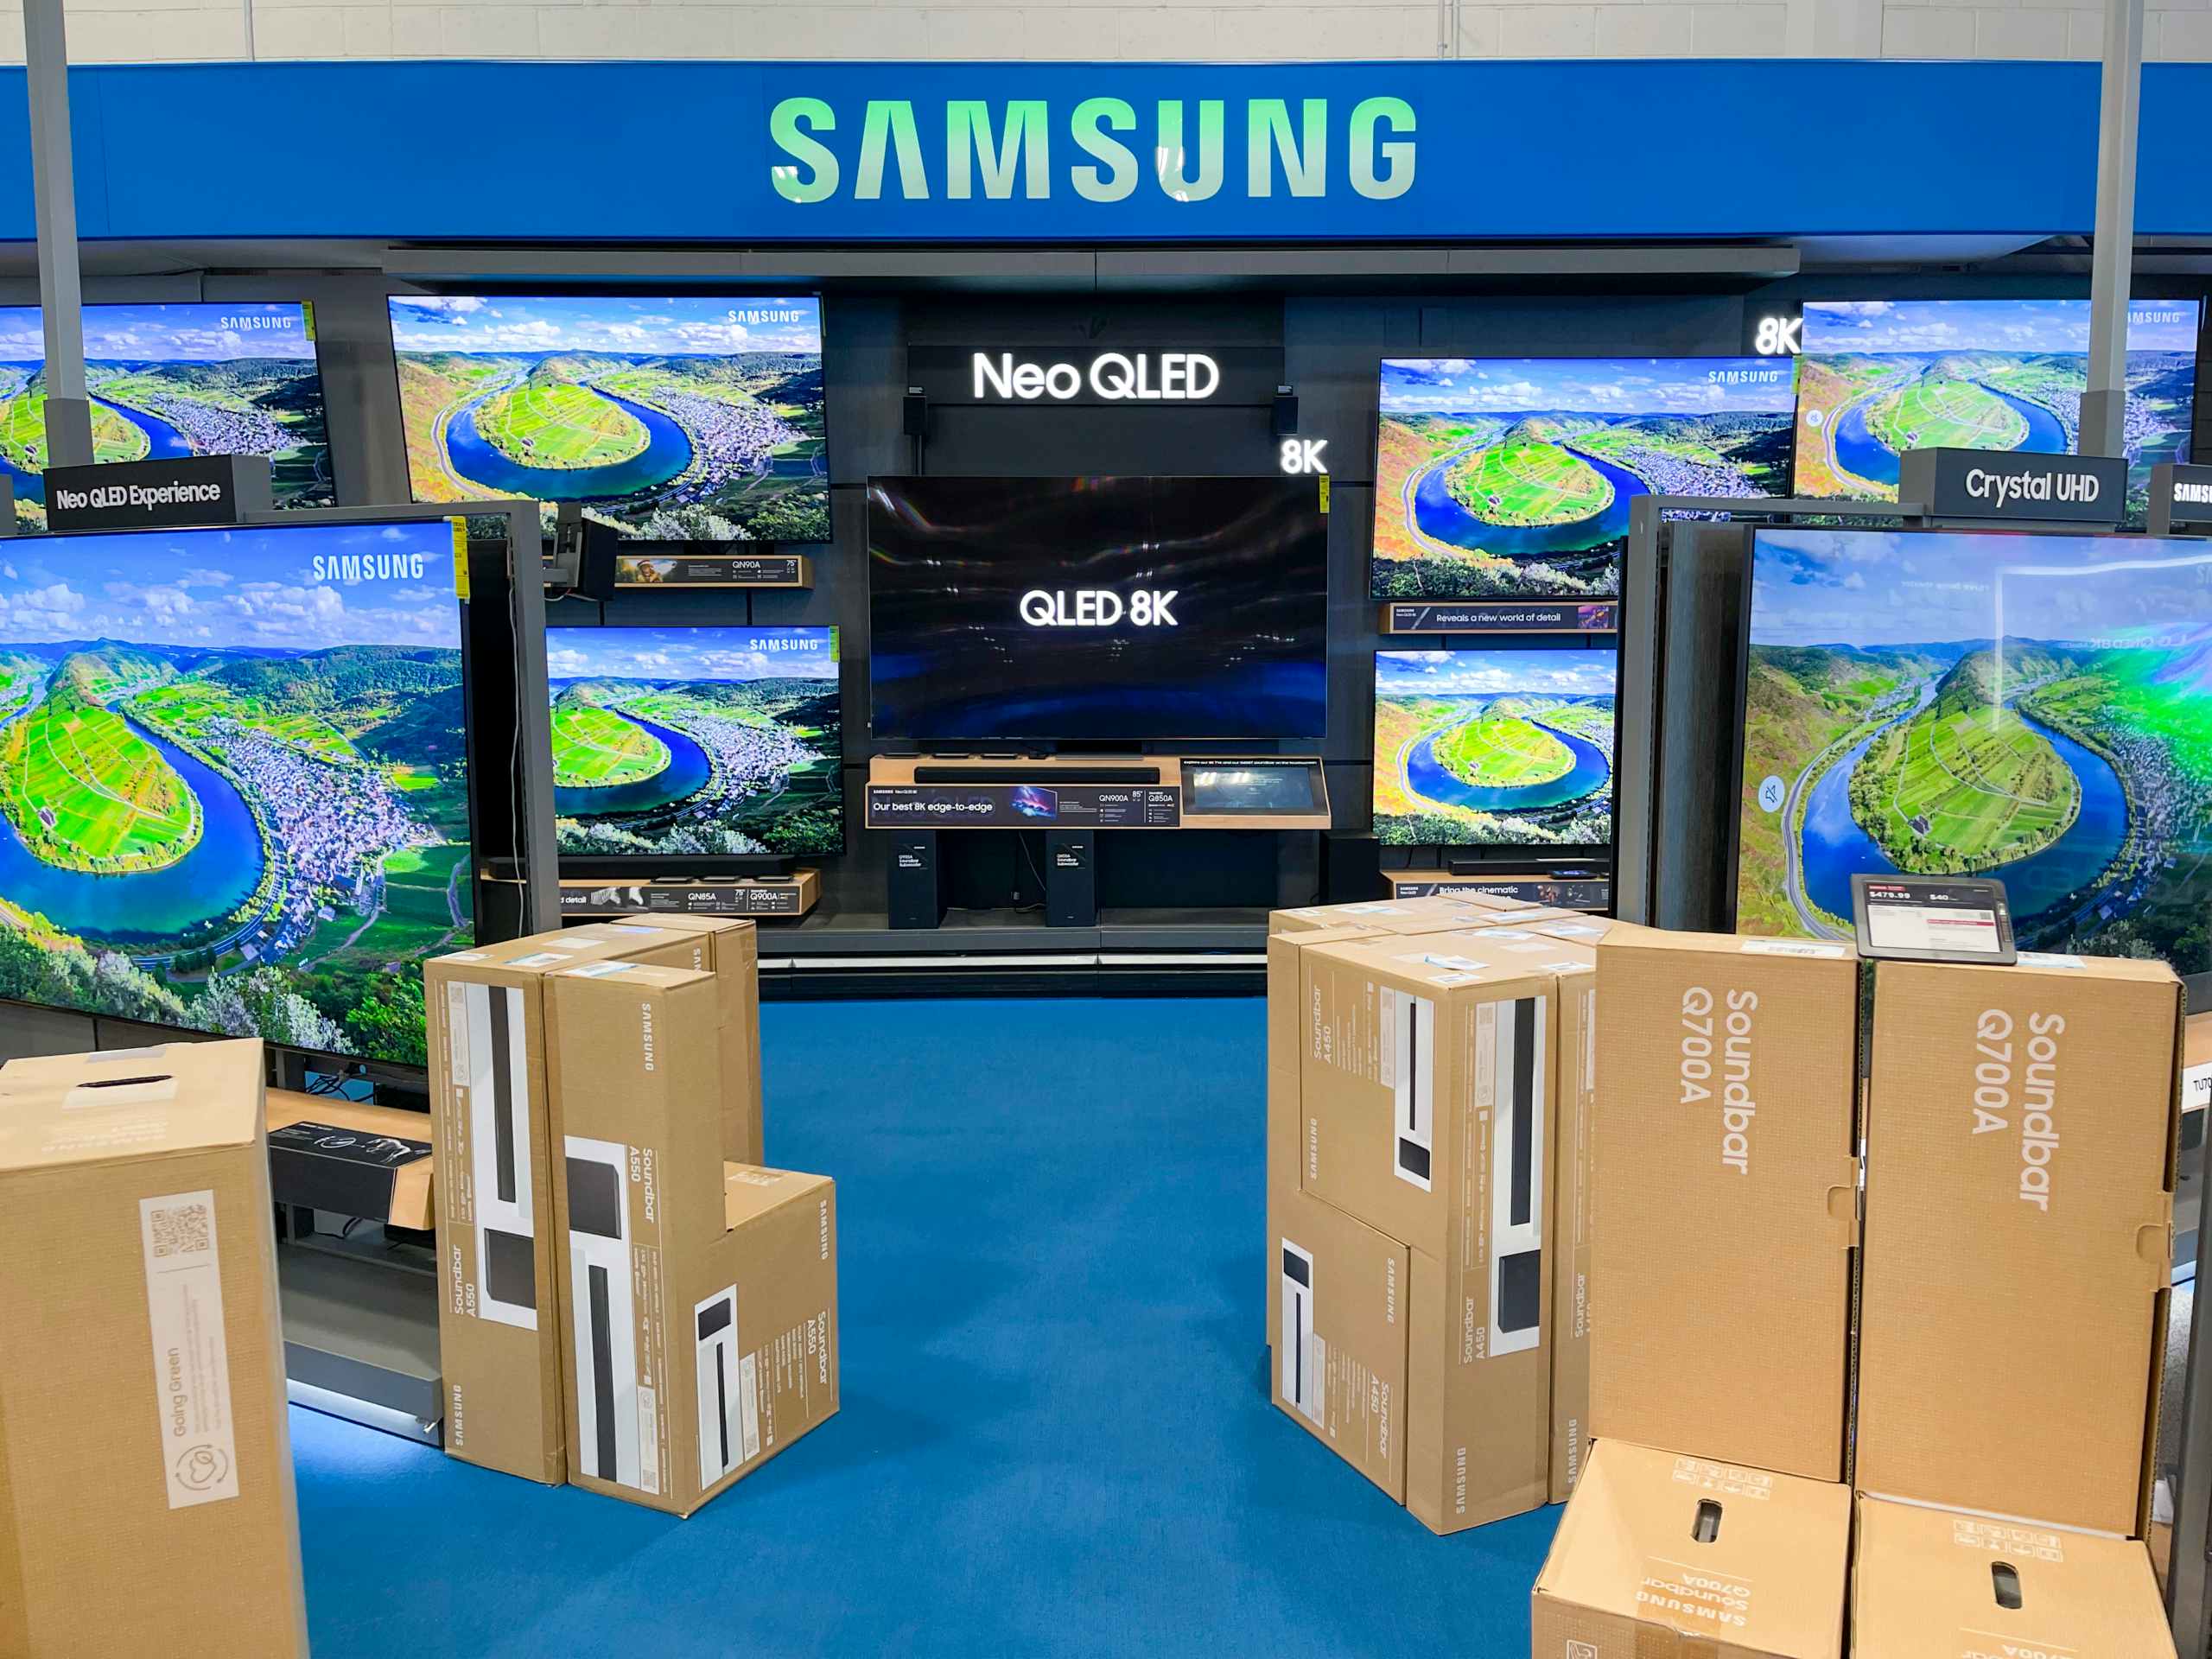 Samsung TV section at Best Buy